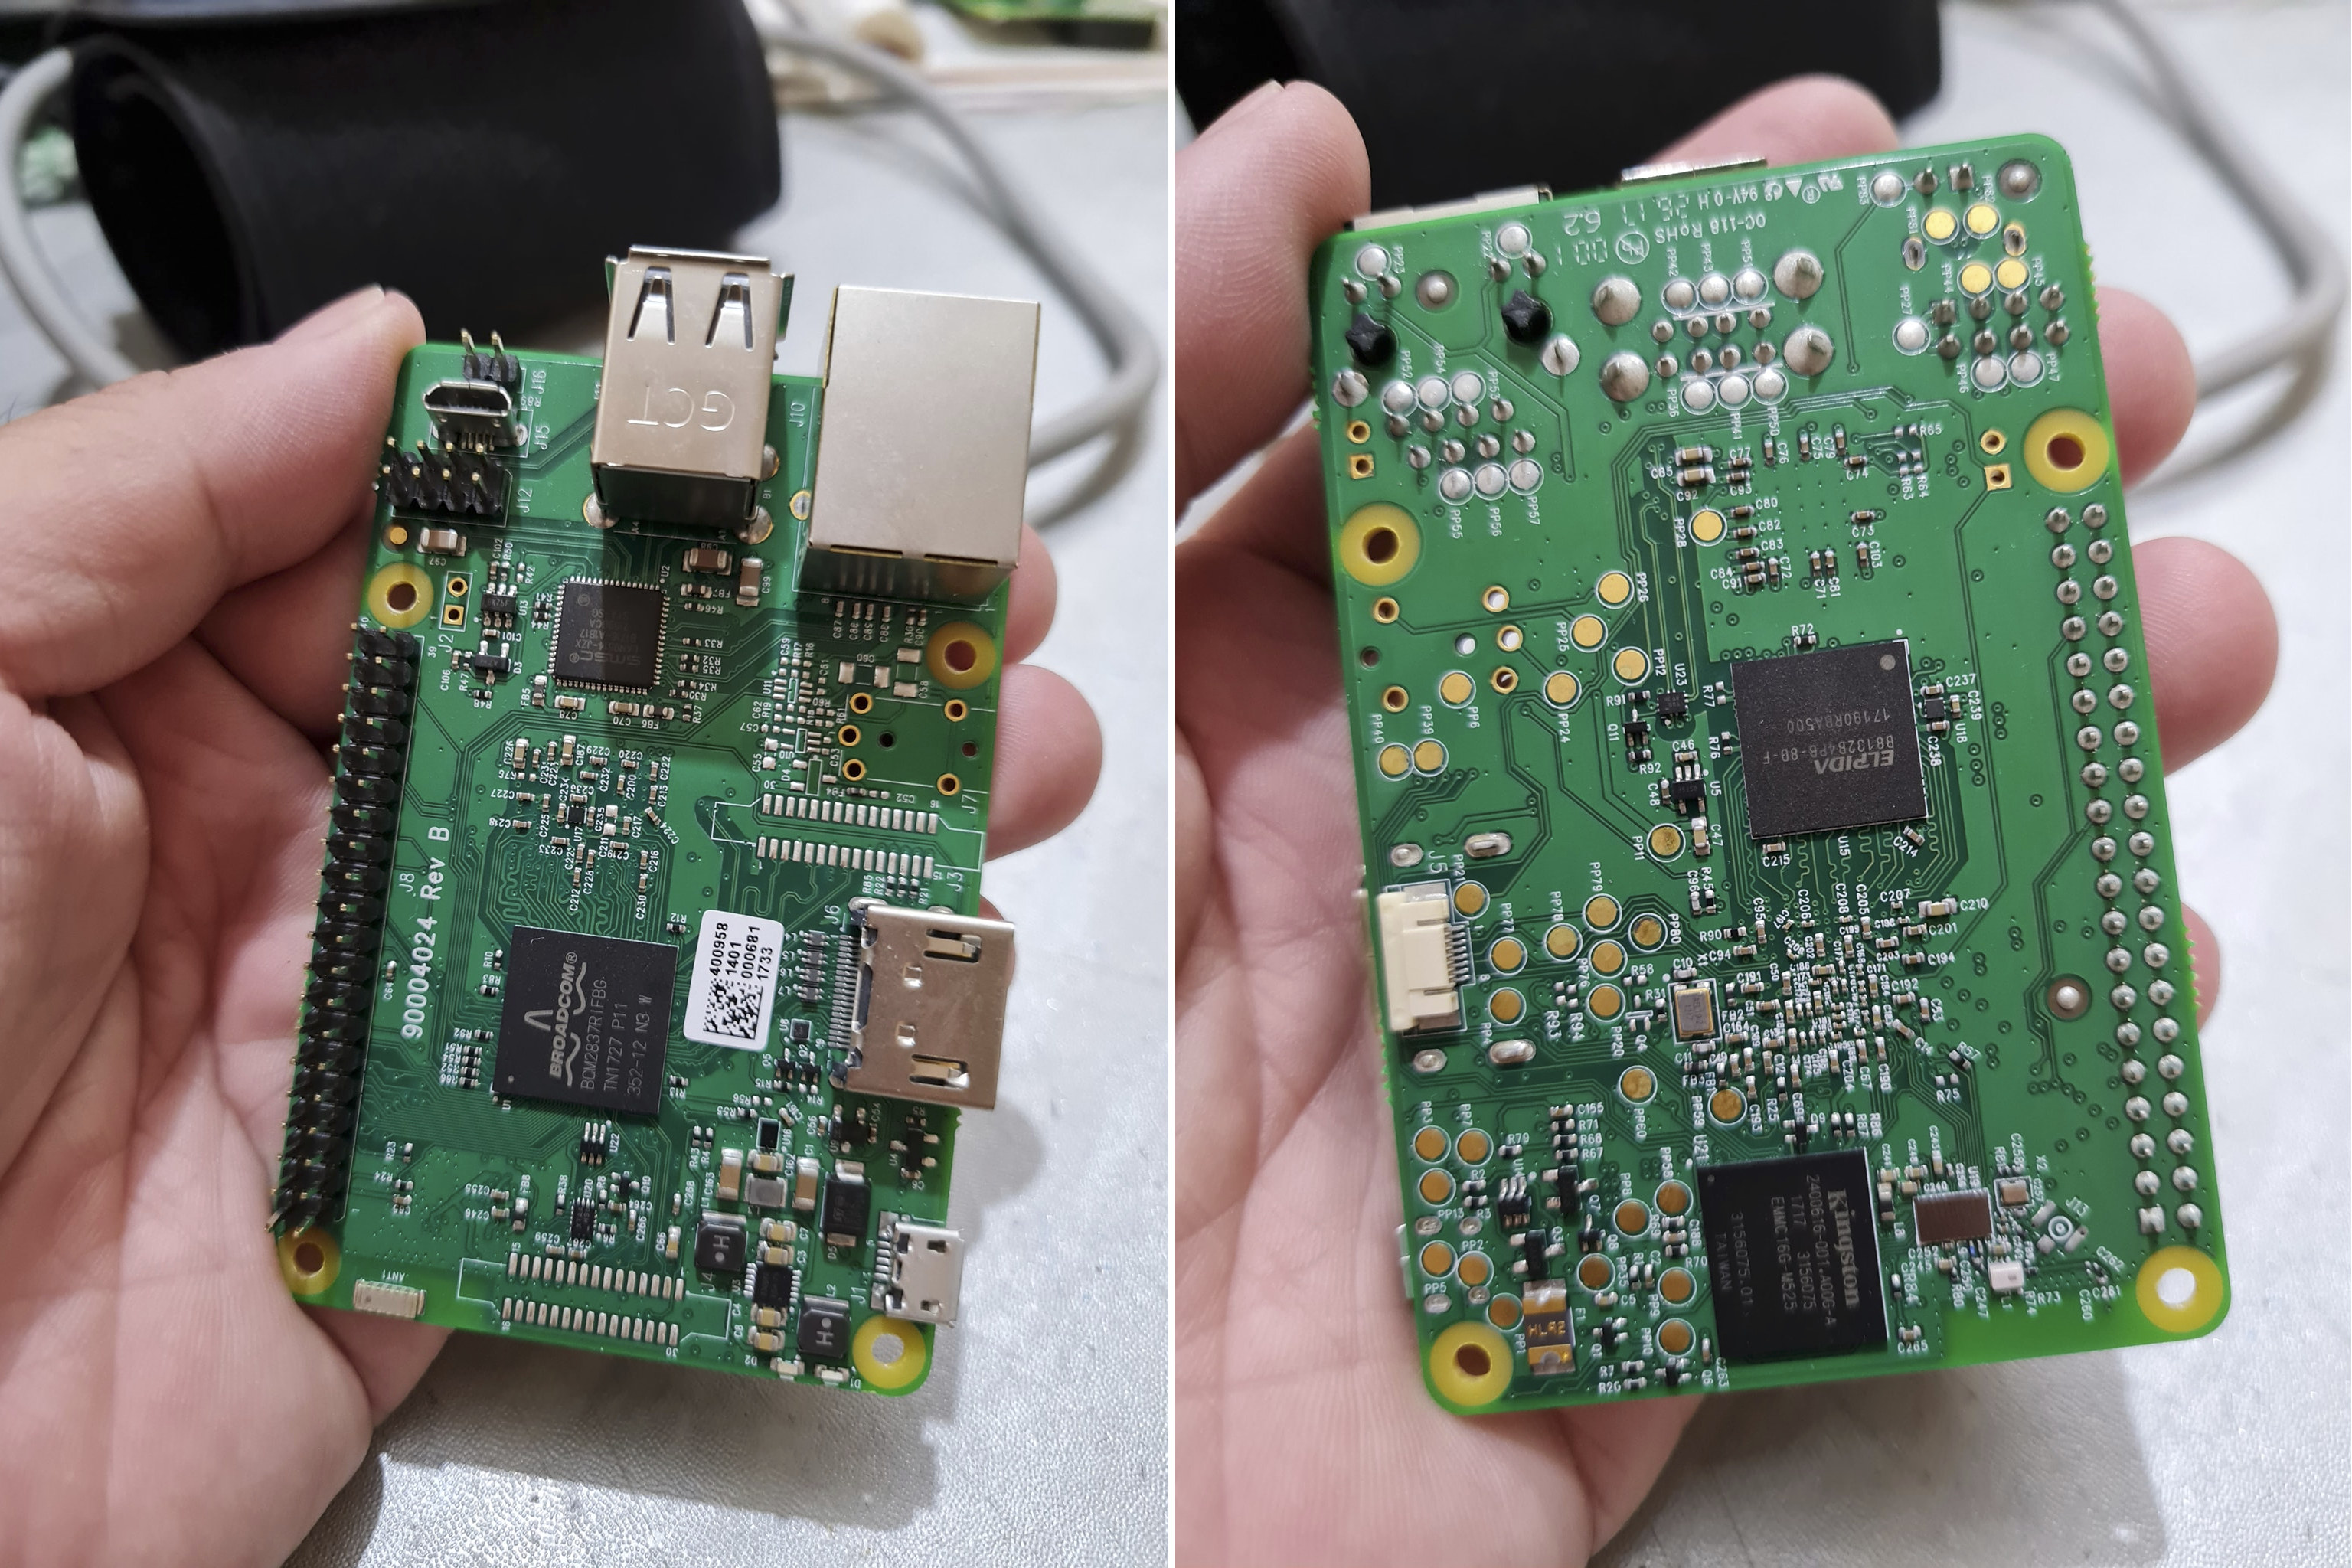 As I was browsing some group on Facebook, I noticed somebody had bought a custom Broadcom BCM2837 SBC that looks very much like a Raspberry Pi 3 board